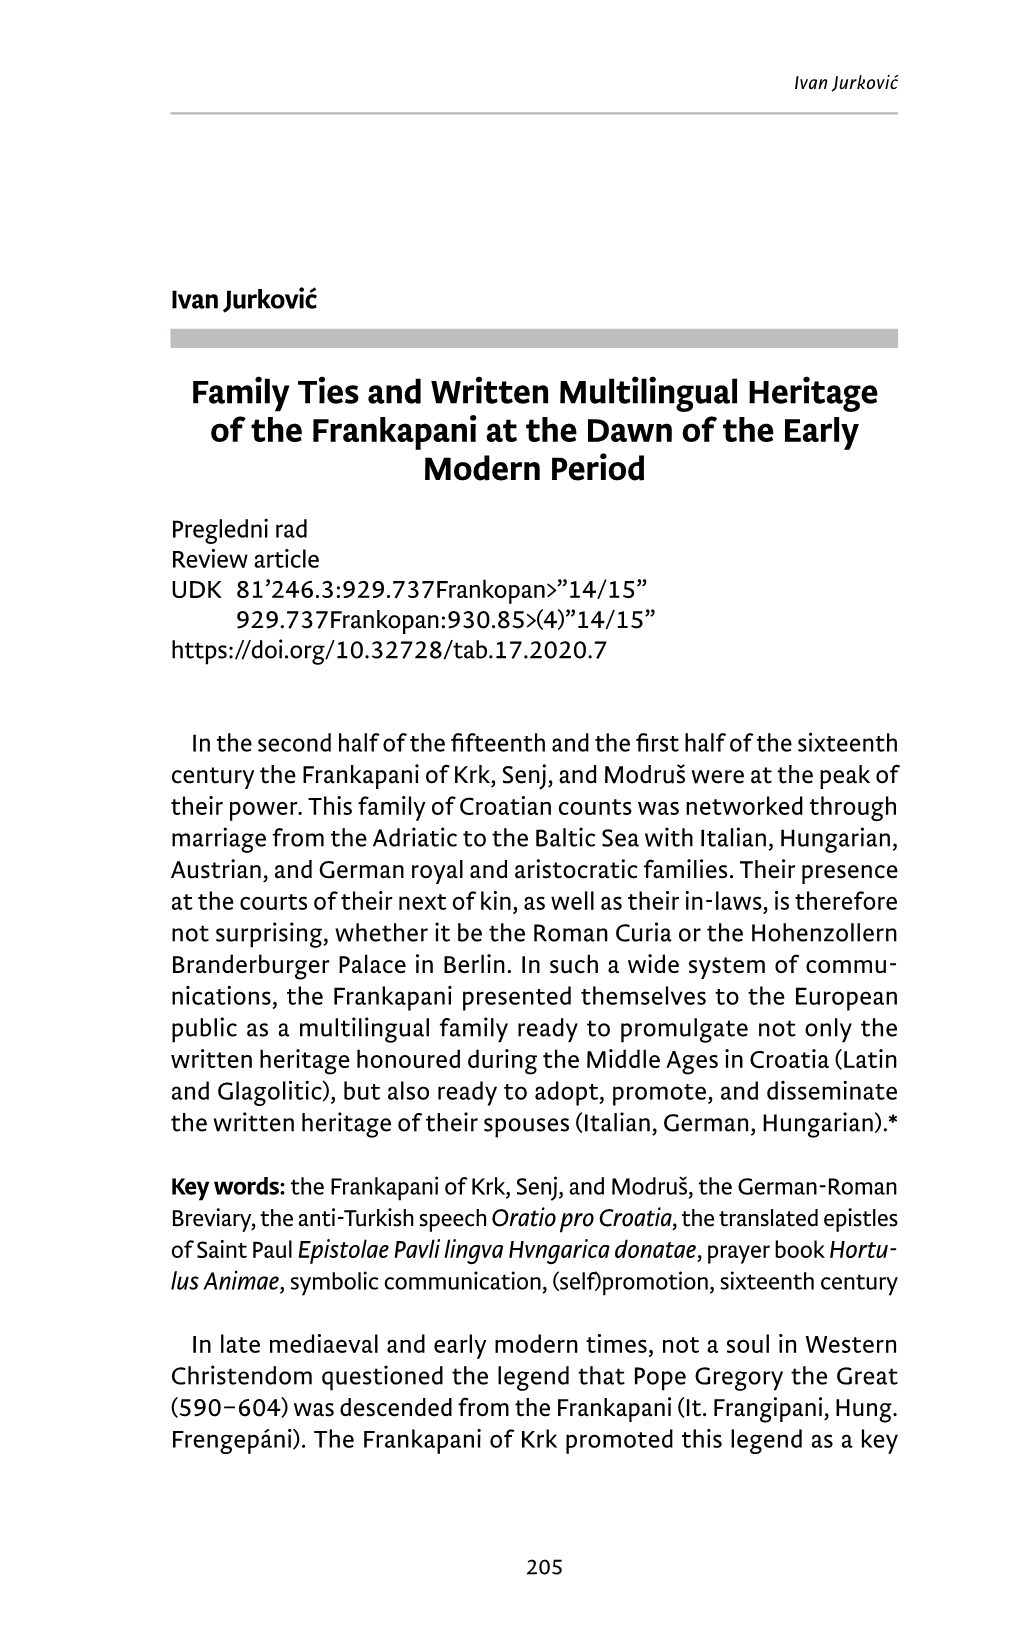 Family Ties and Written Multilingual Heritage of the Frankapani at the Dawn of the Early Modern Period